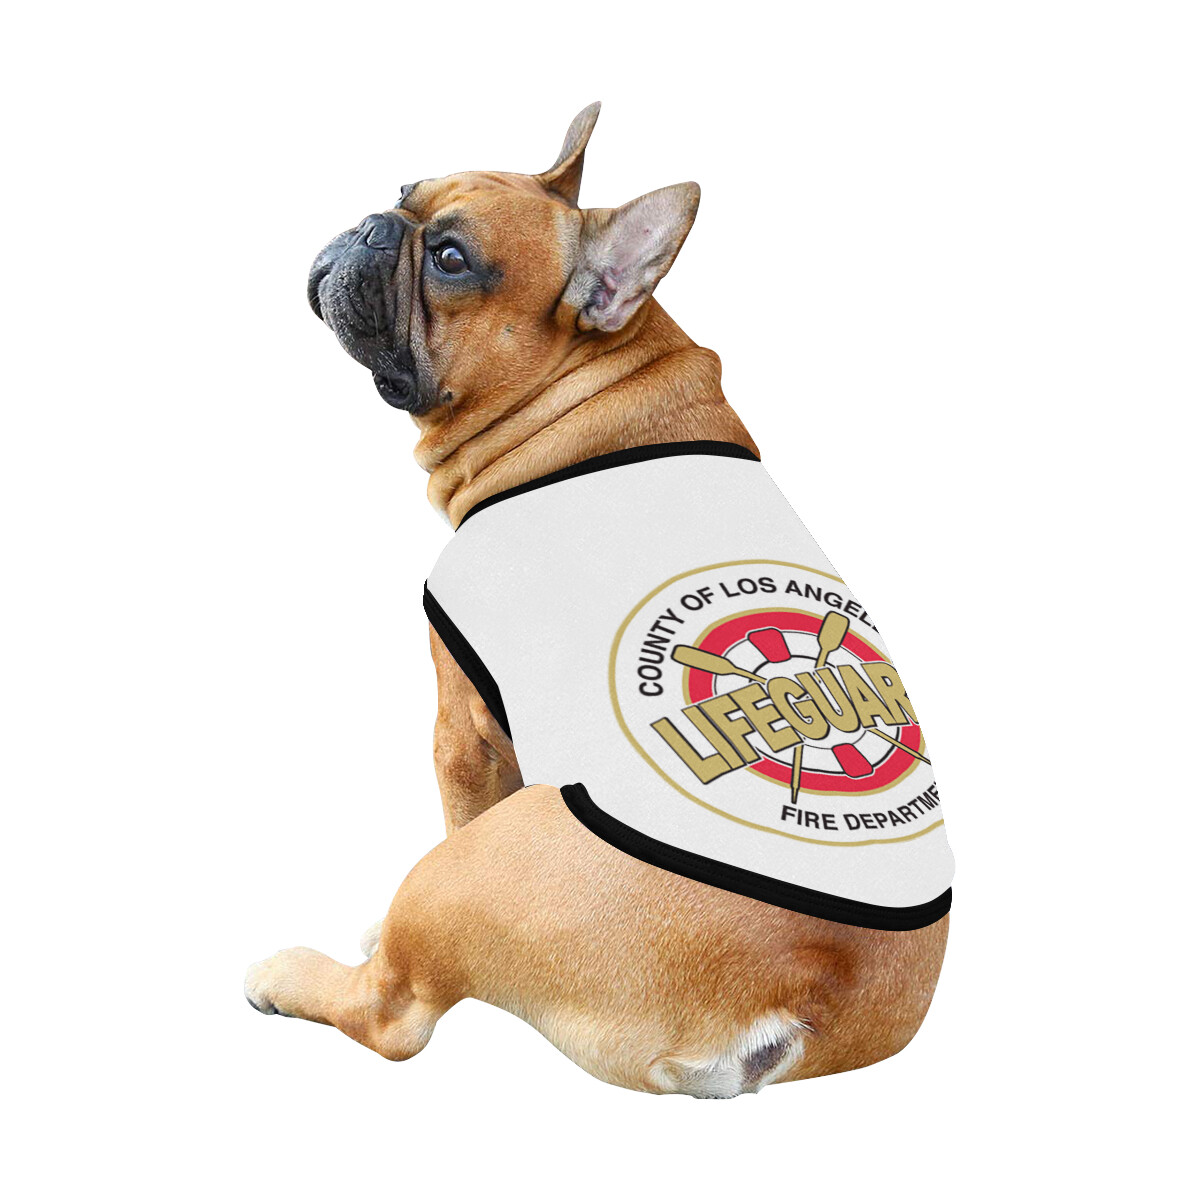 🐕 Lifeguard LAFD Los Angeles Fire Department Dog shirt, Dog Tank Top, Dog t-shirt, Dog clothes, Gifts, front back print, 7 sizes XS to 3XL, dog gifts, white